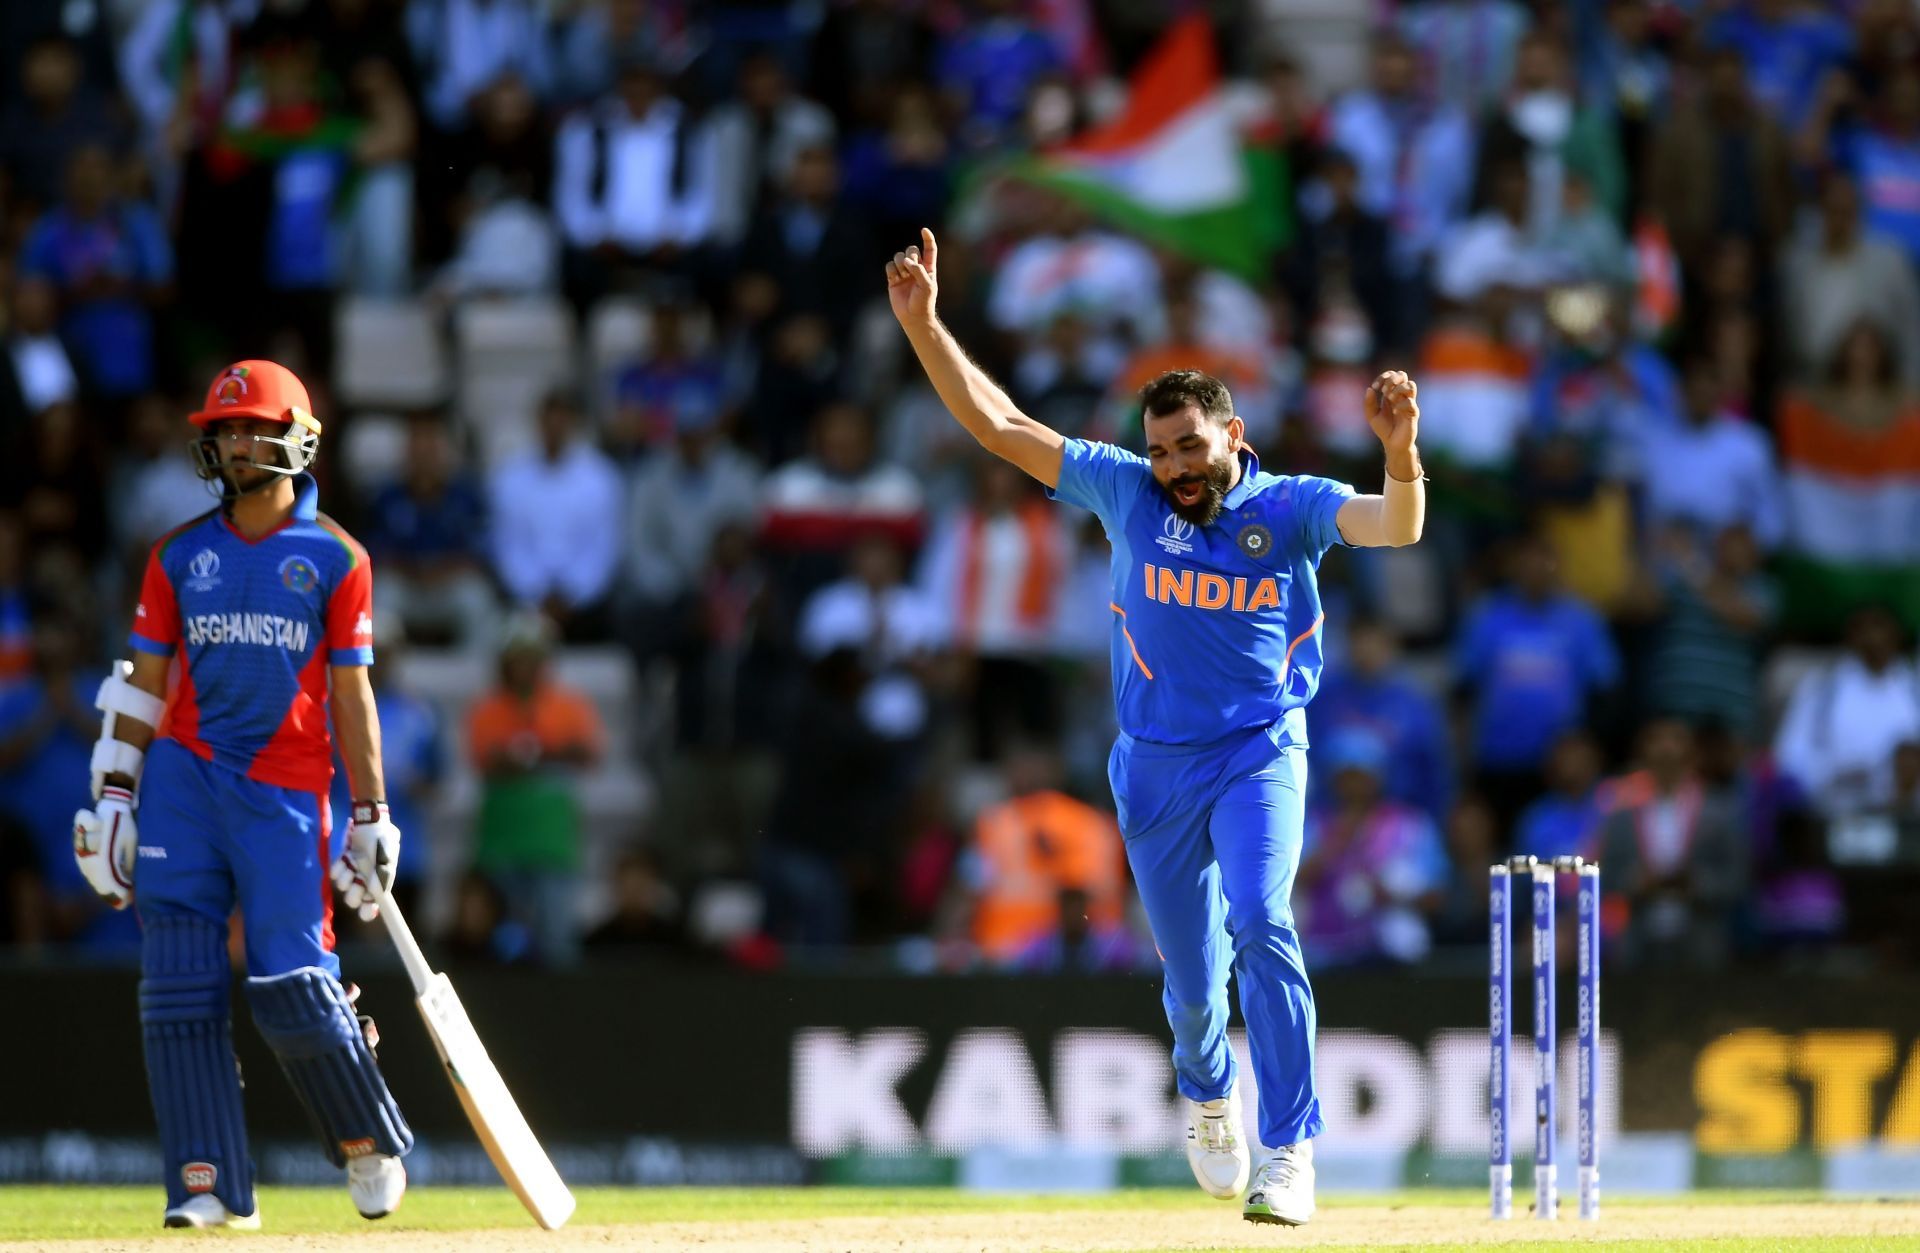 Shami won the match for India with a hat-trick